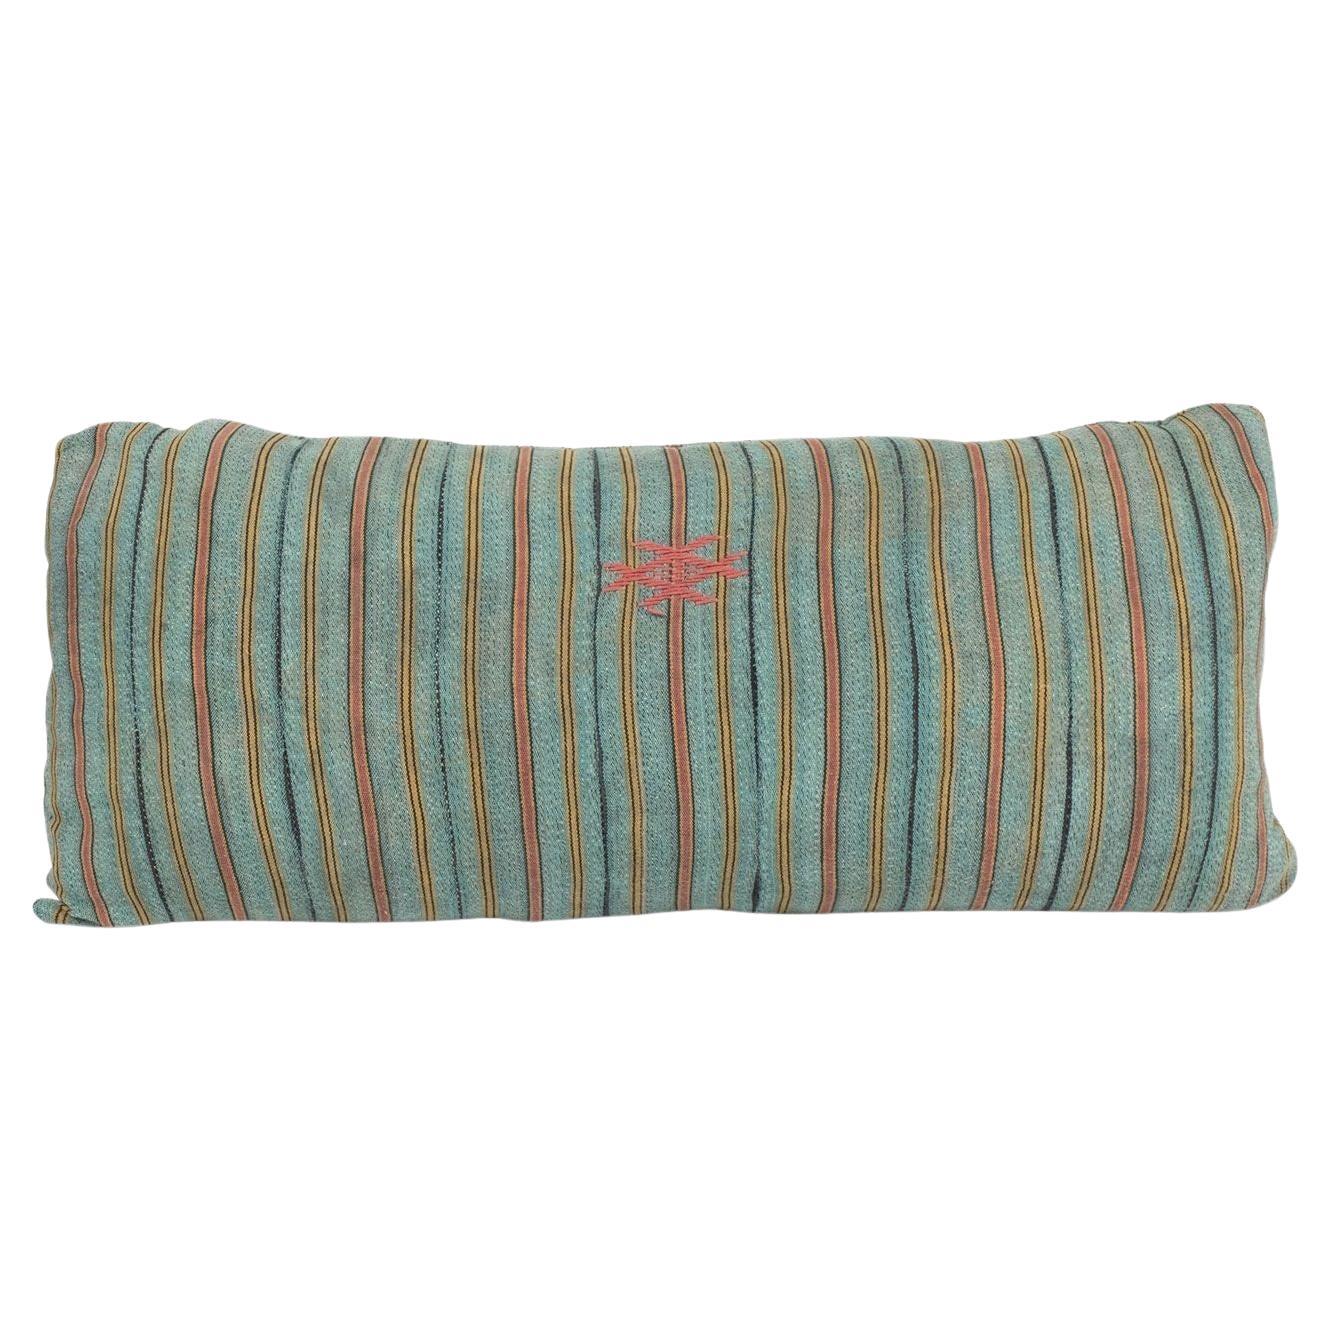 Large Teal, Gold, Navy and Coral Striped Print Lumbar Cushion For Sale